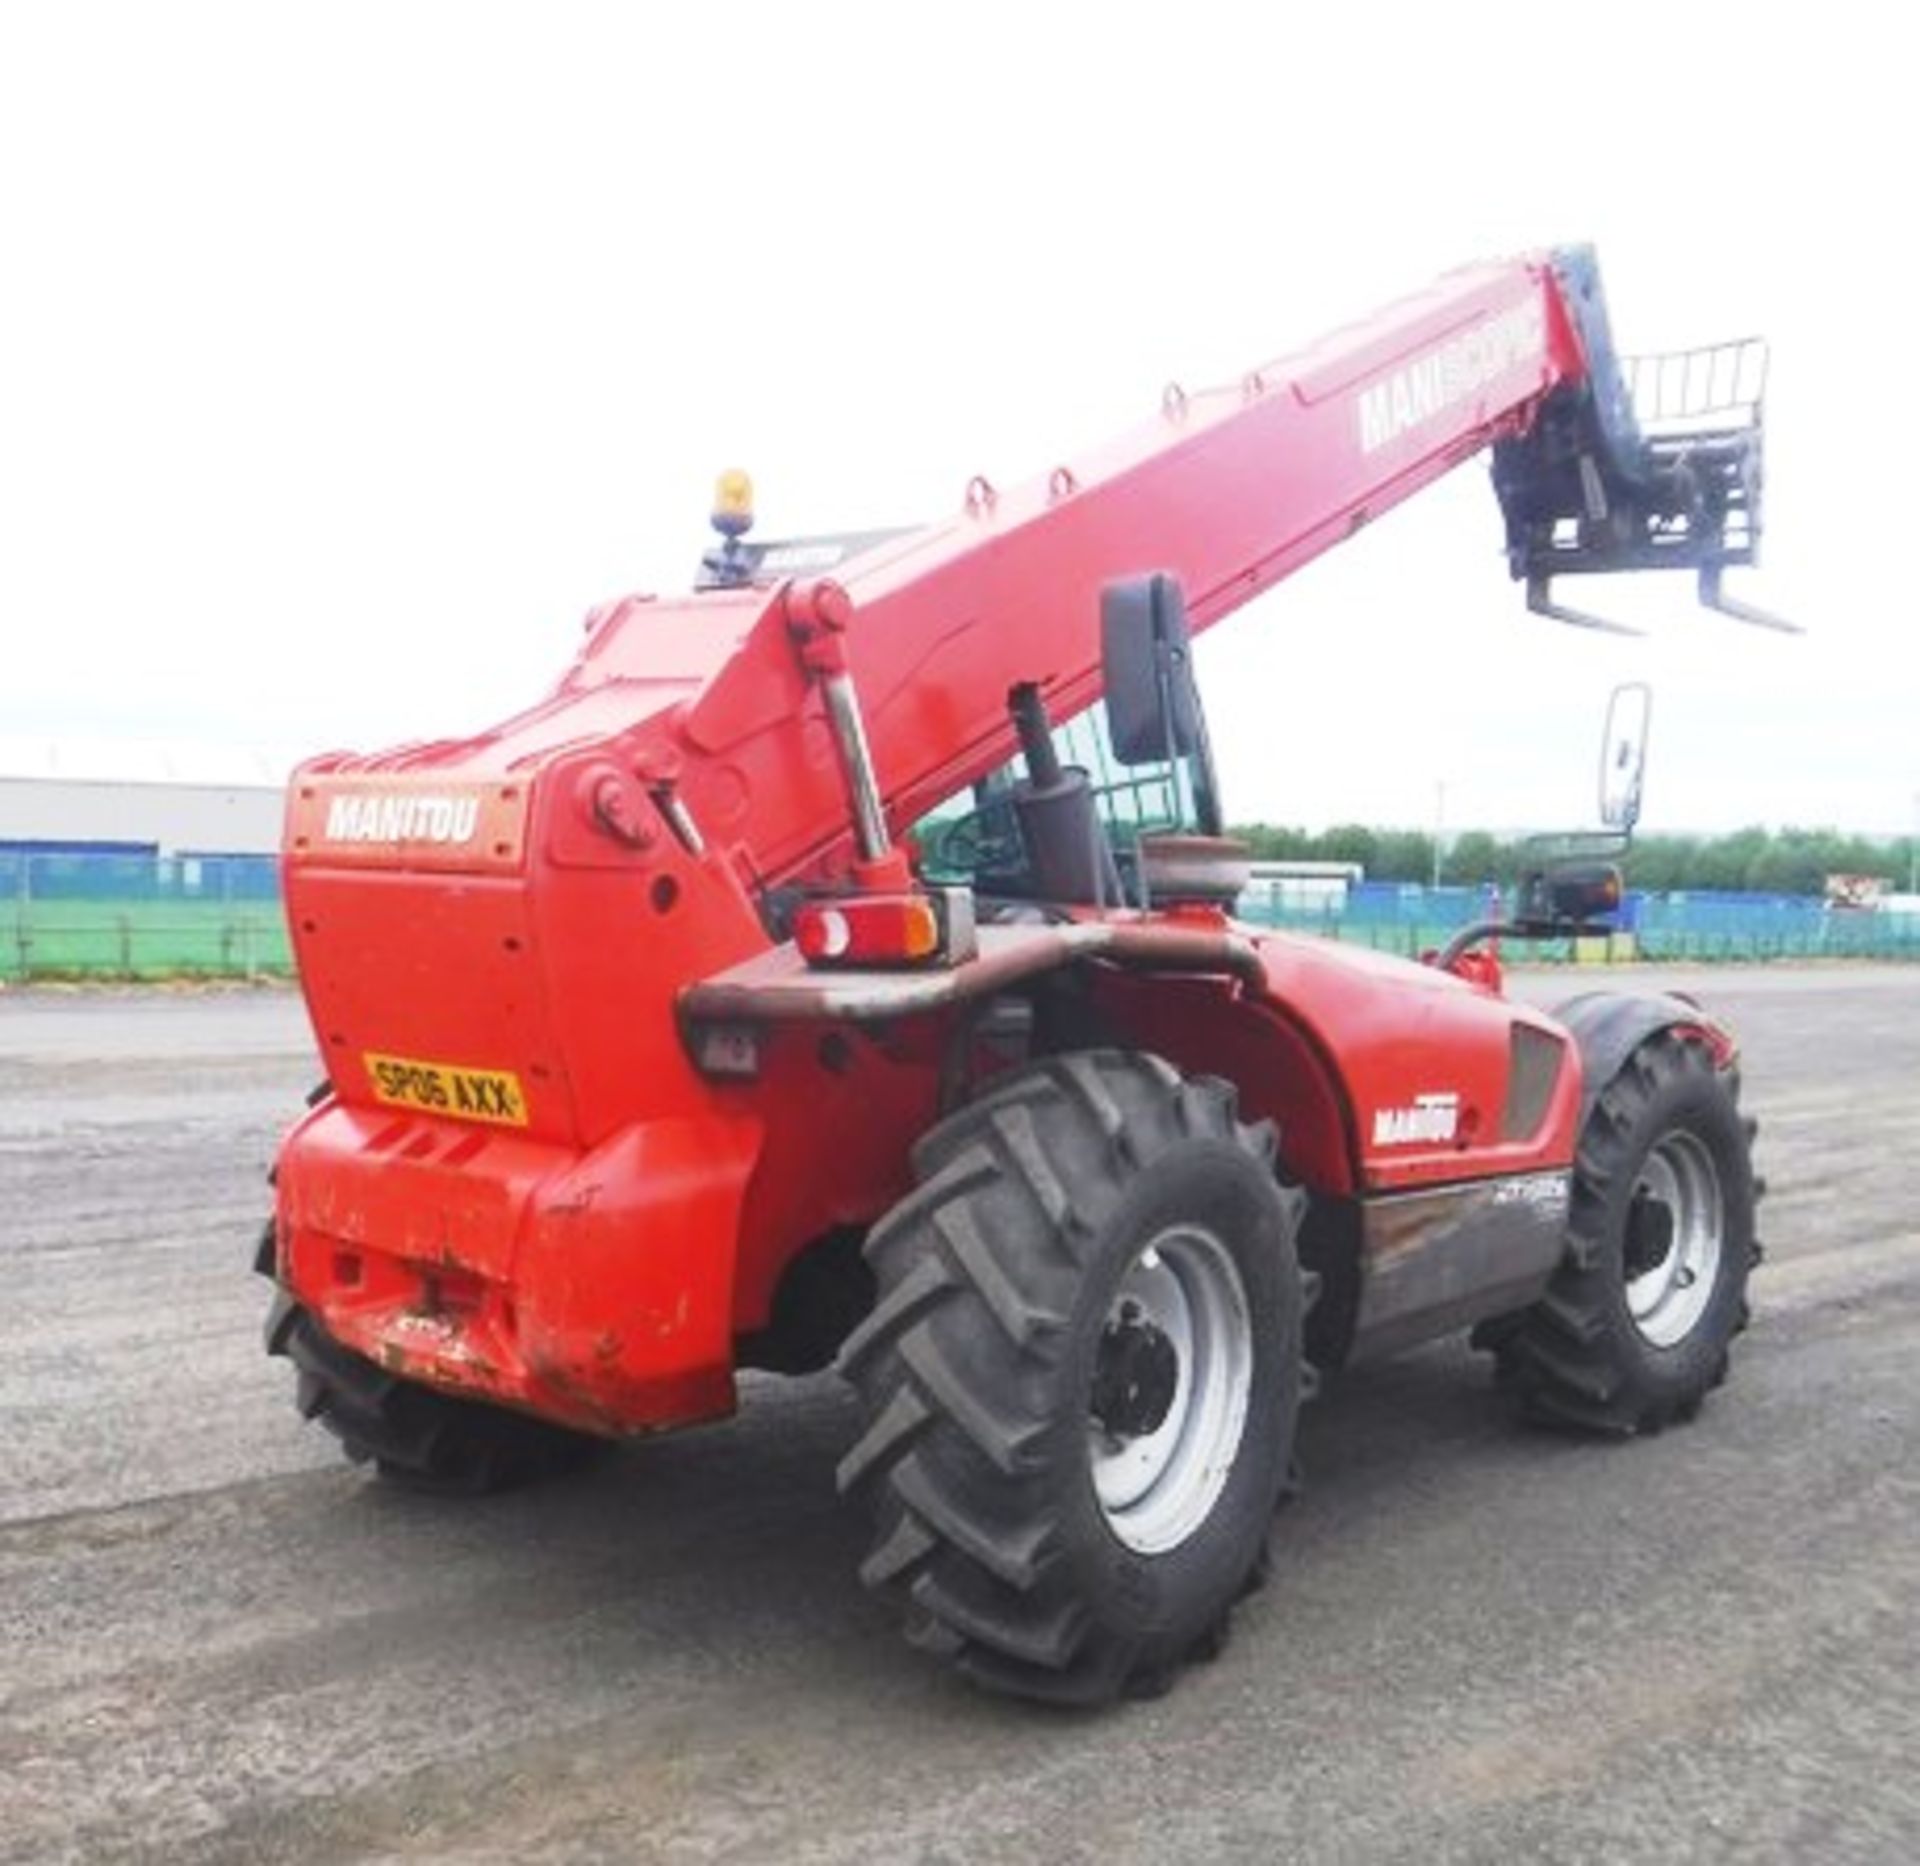 2006 MANITOU 14/35 TELEHANDLER c/w bucket & forks s/n 1230044 Reg no SP06 AXX 2646hrs (not verified) - Image 9 of 16